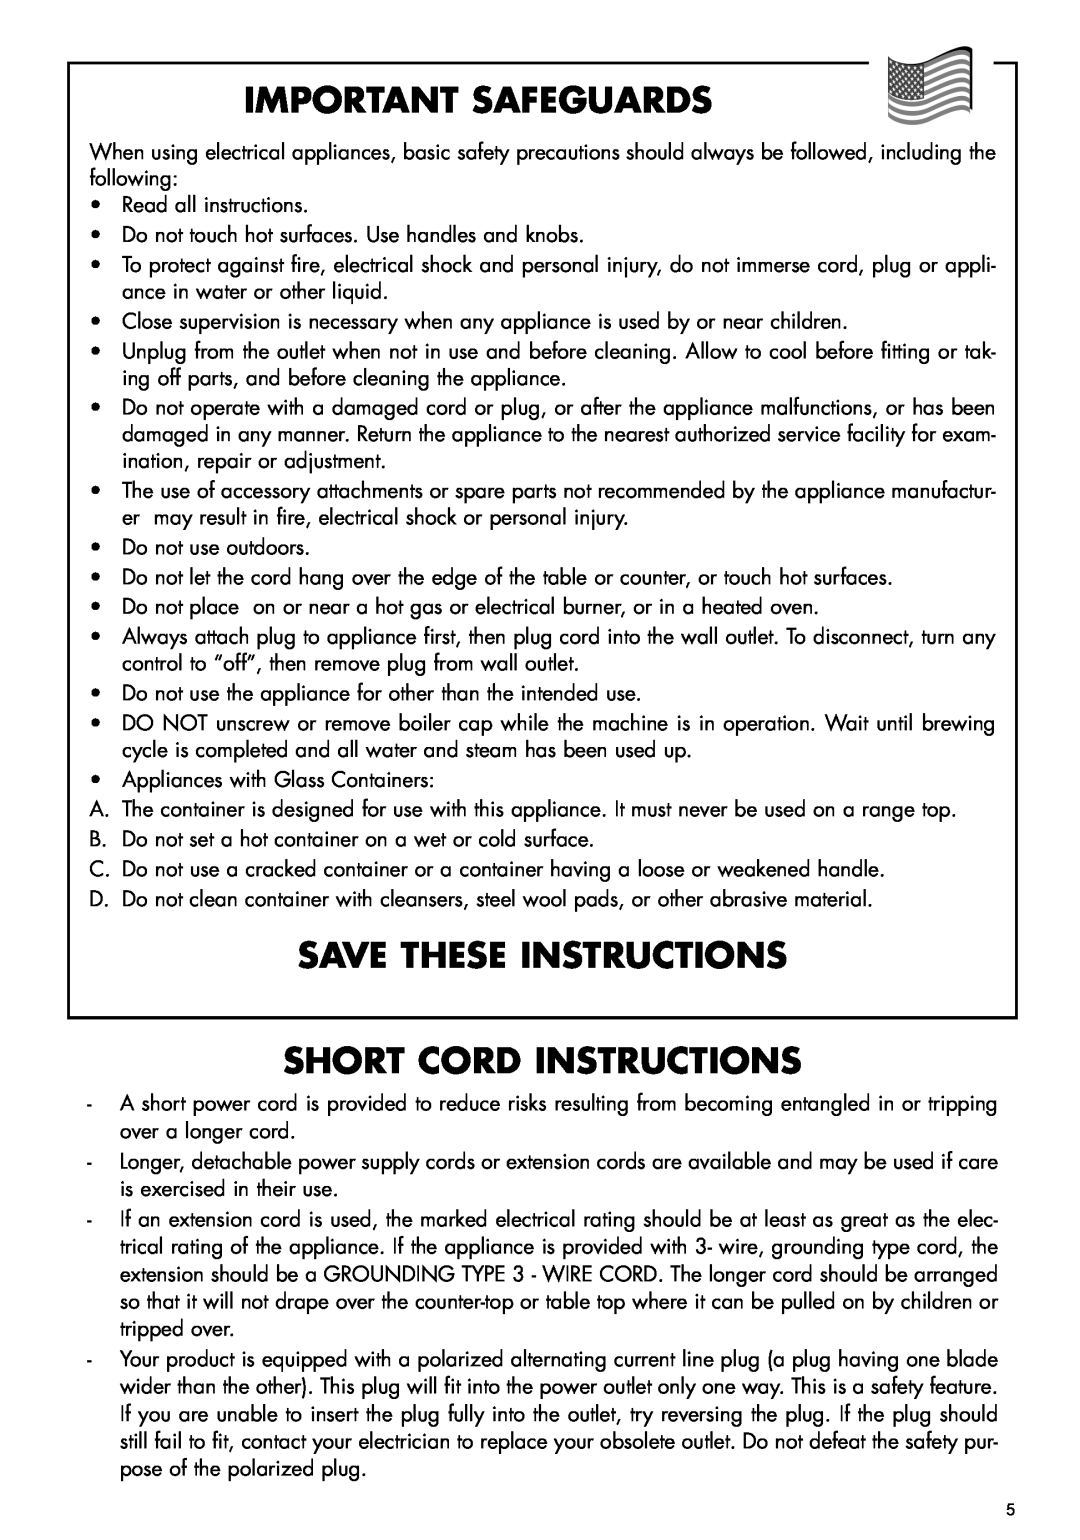 DeLonghi BCO110 manual Important Safeguards, Save These Instructions Short Cord Instructions 